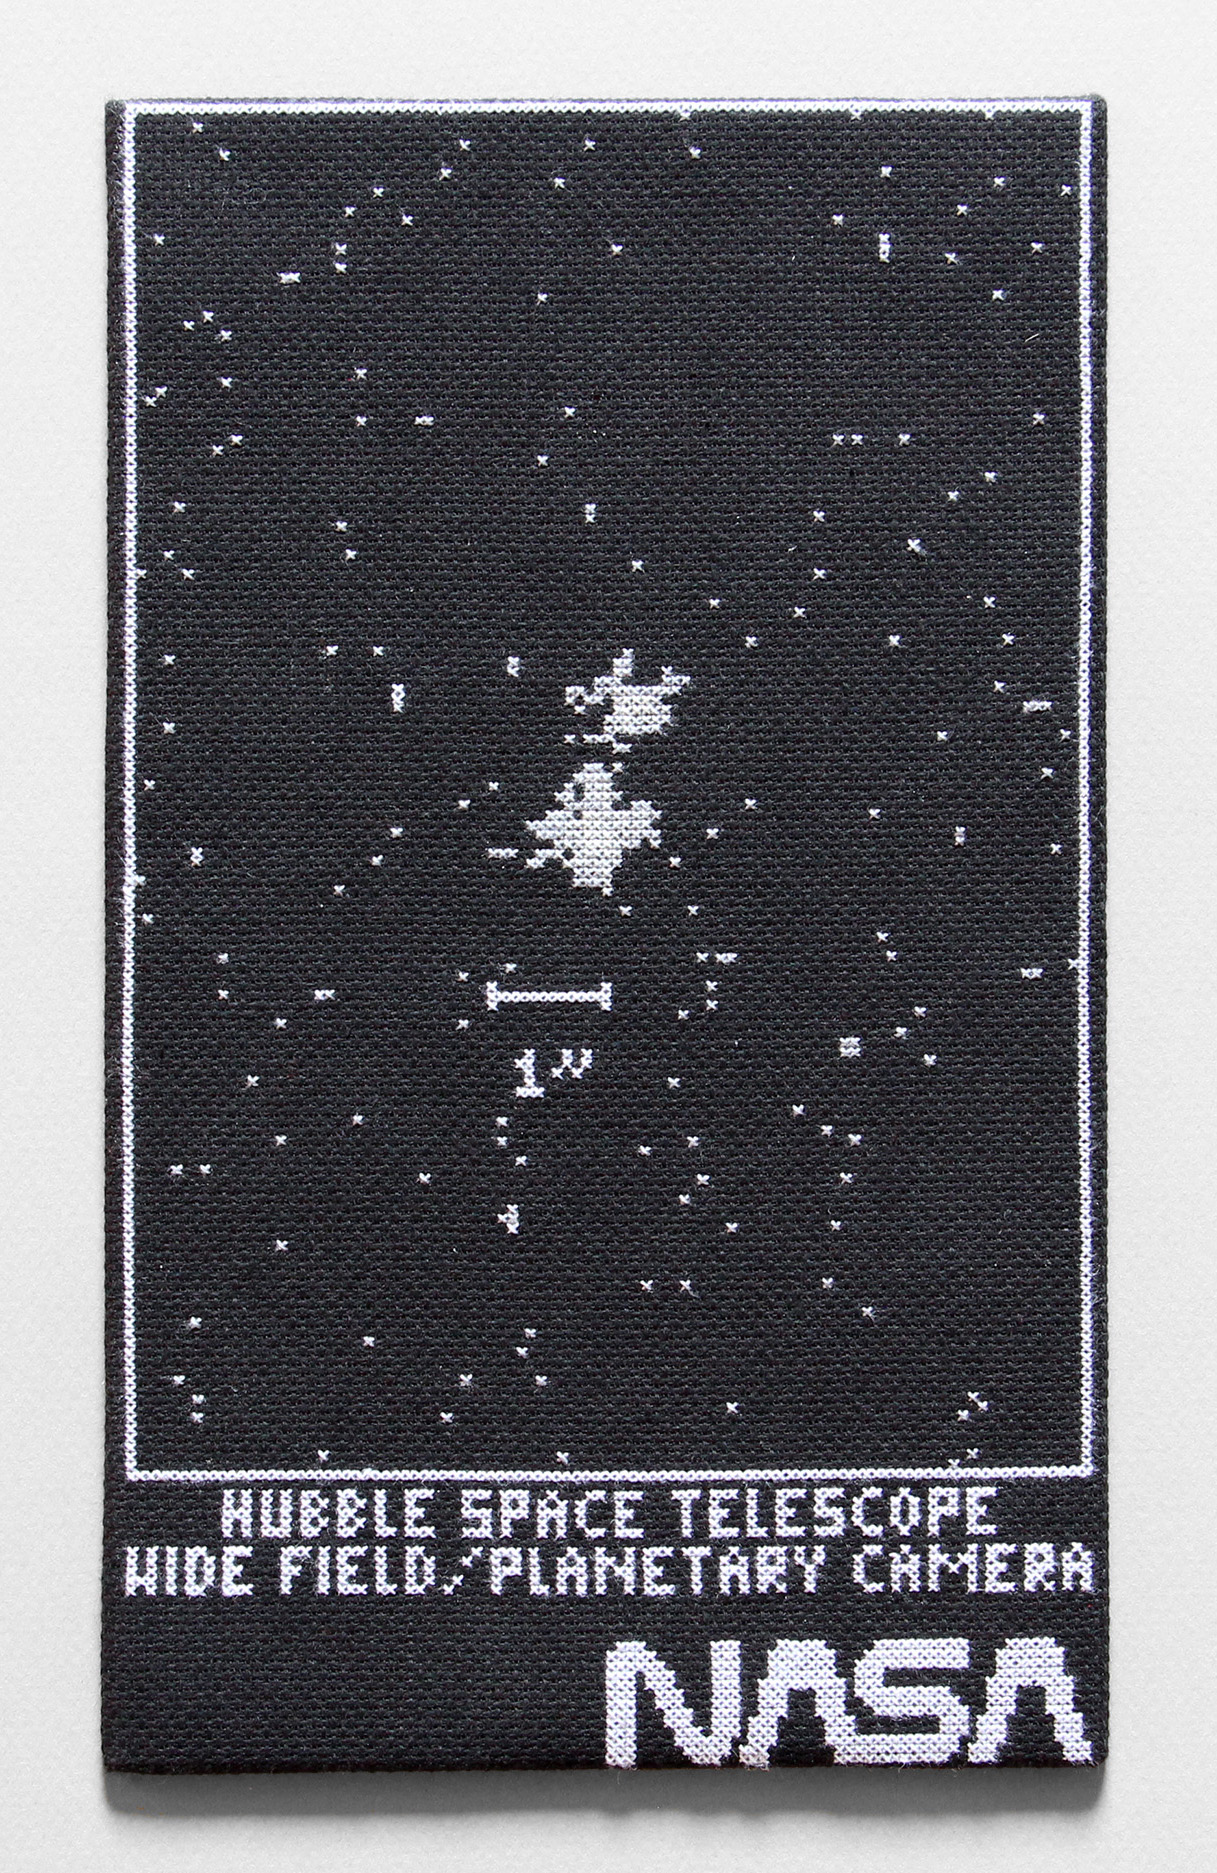  / Cross-stitch embroidery inspired by the first shot by Hubble. Art by artist Marine Beaufils.